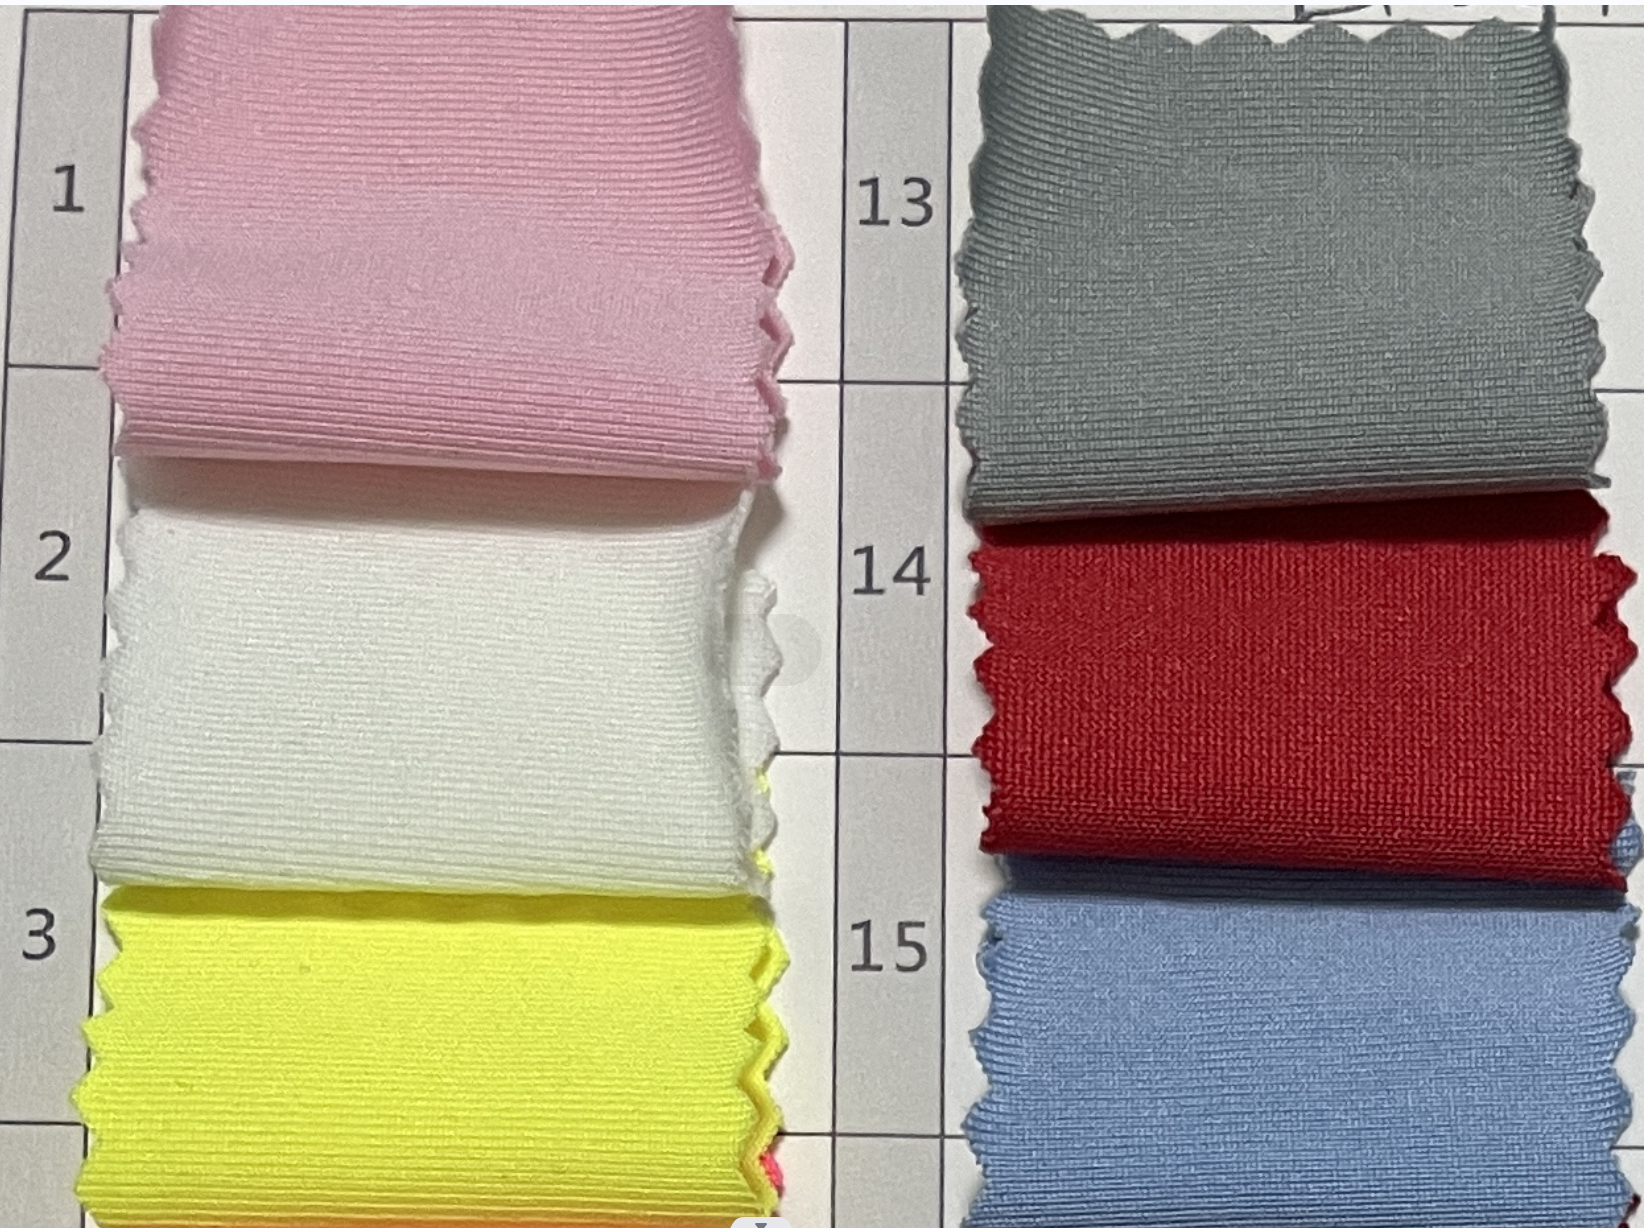 90% Recycled Polyester 10% Spandex Knit Jersey Fabric--180g